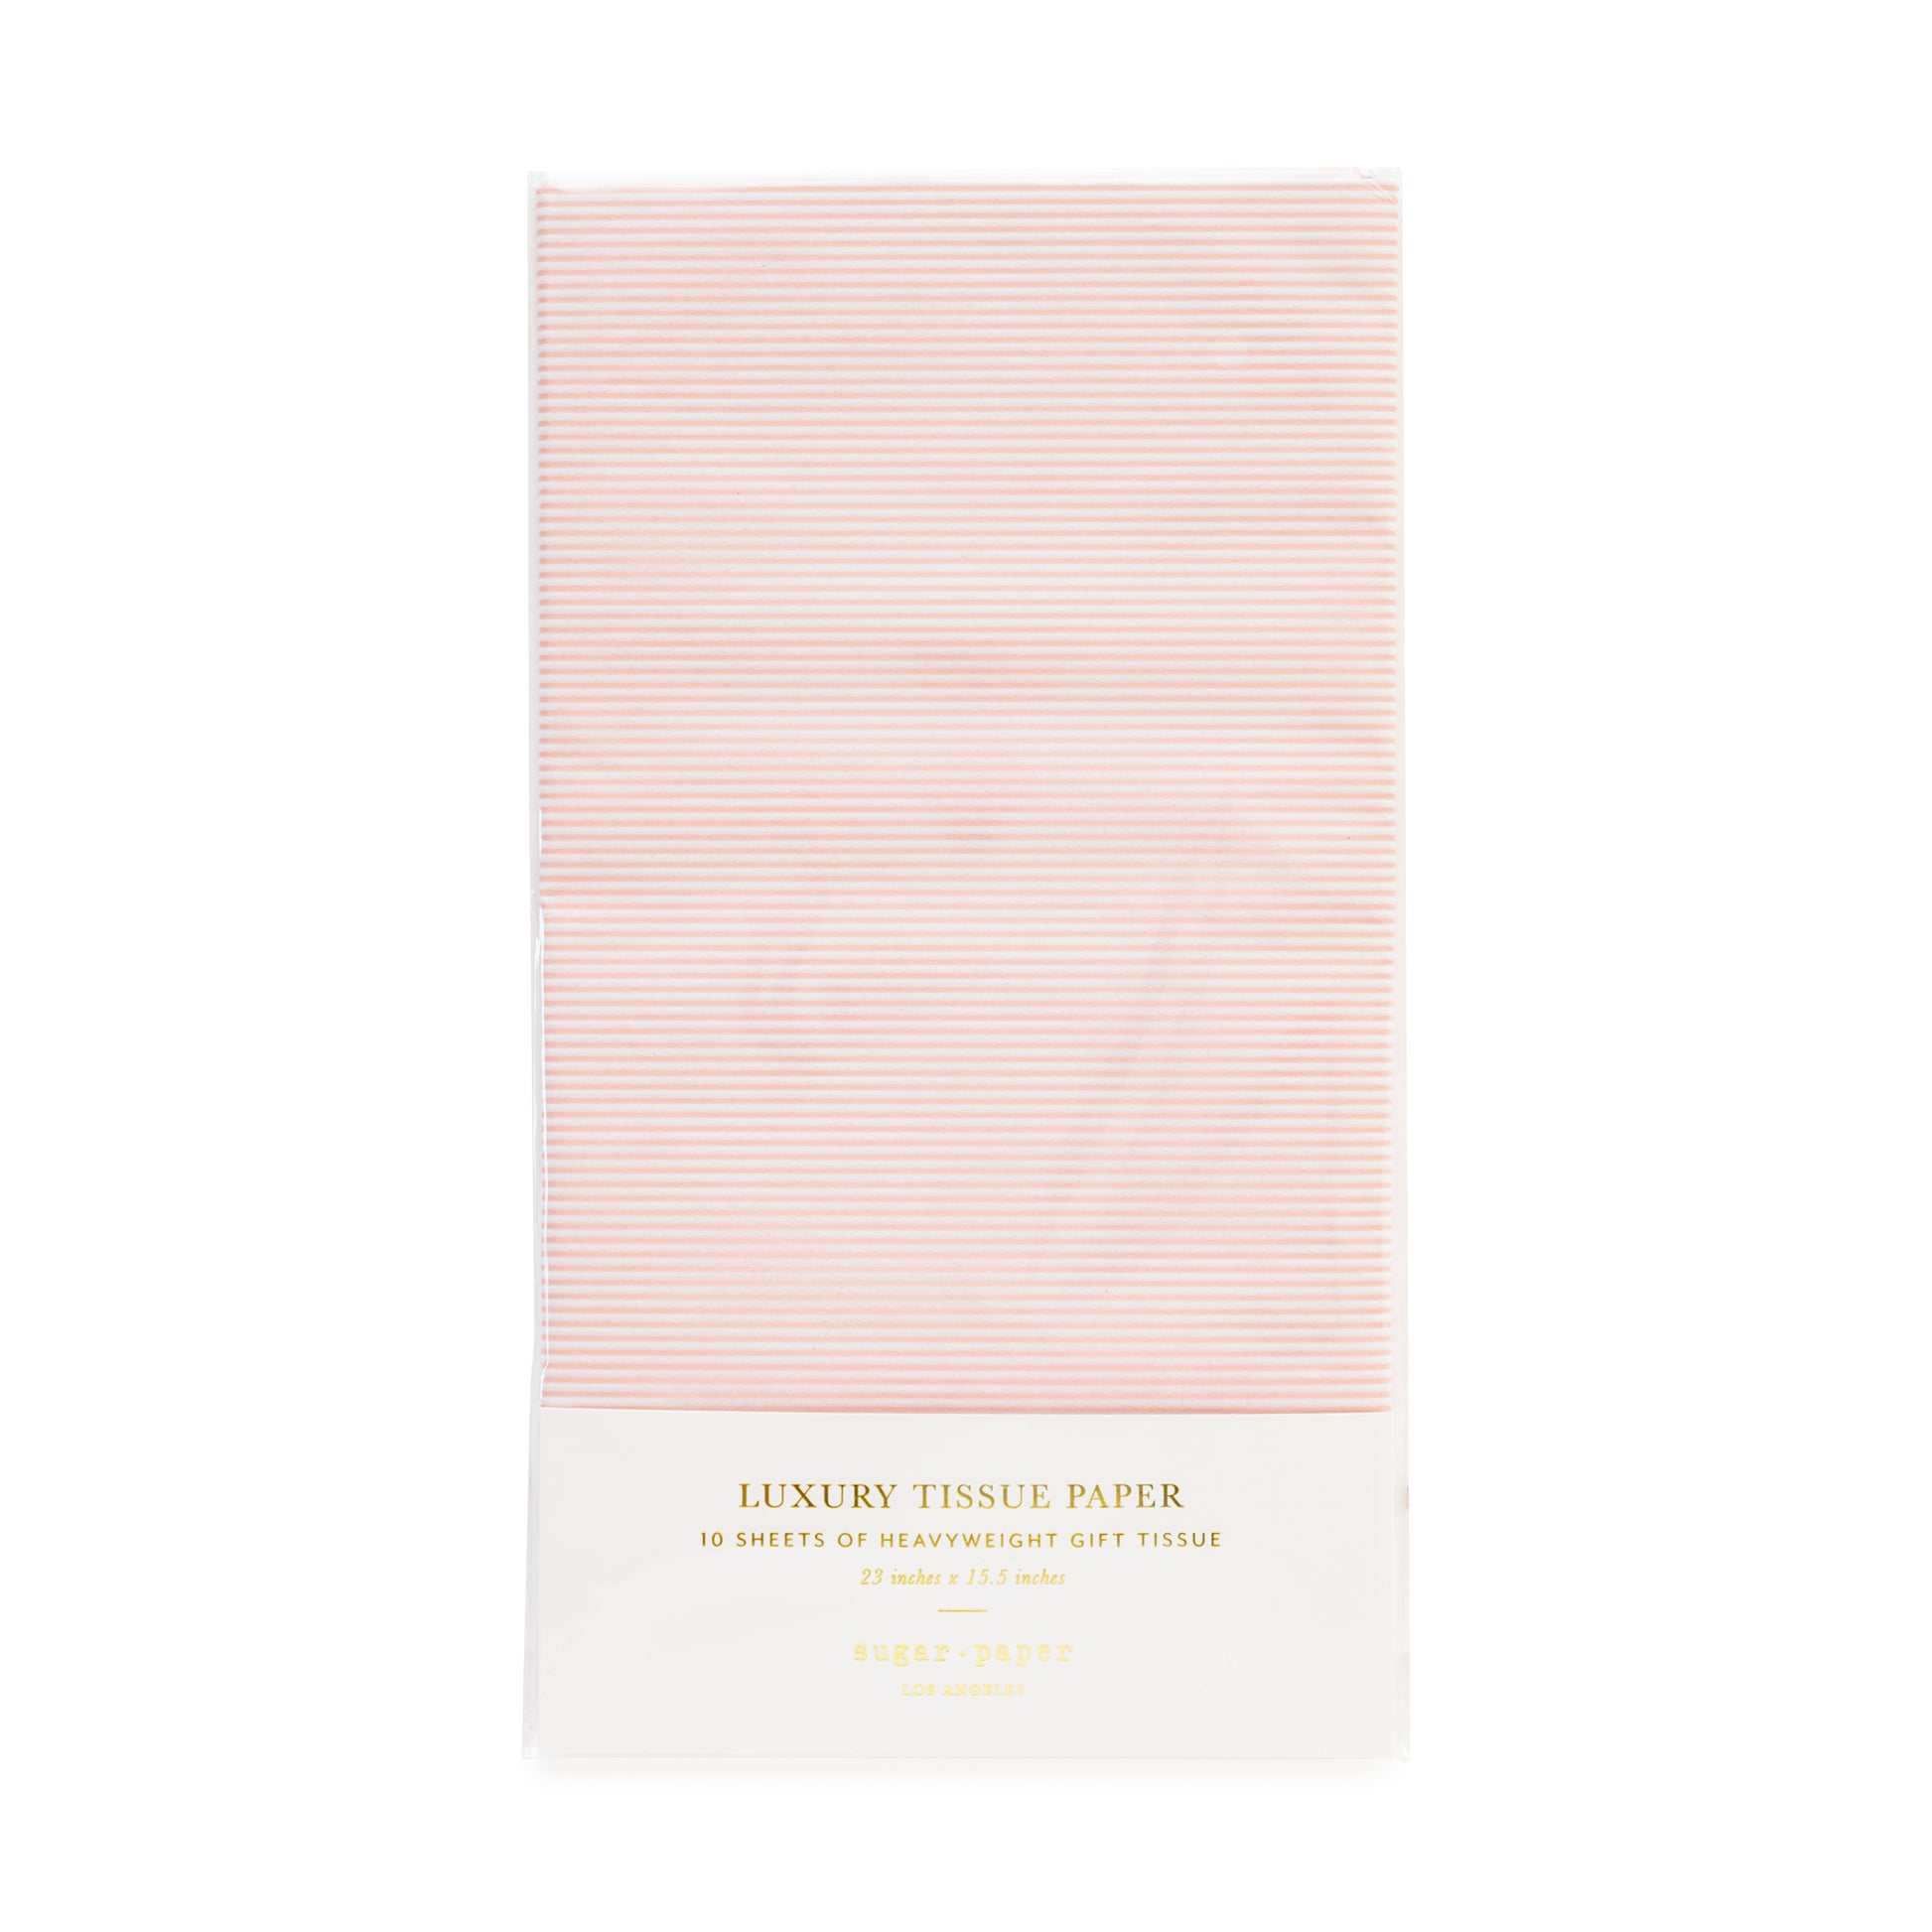 Pink and white stripe tissue paper